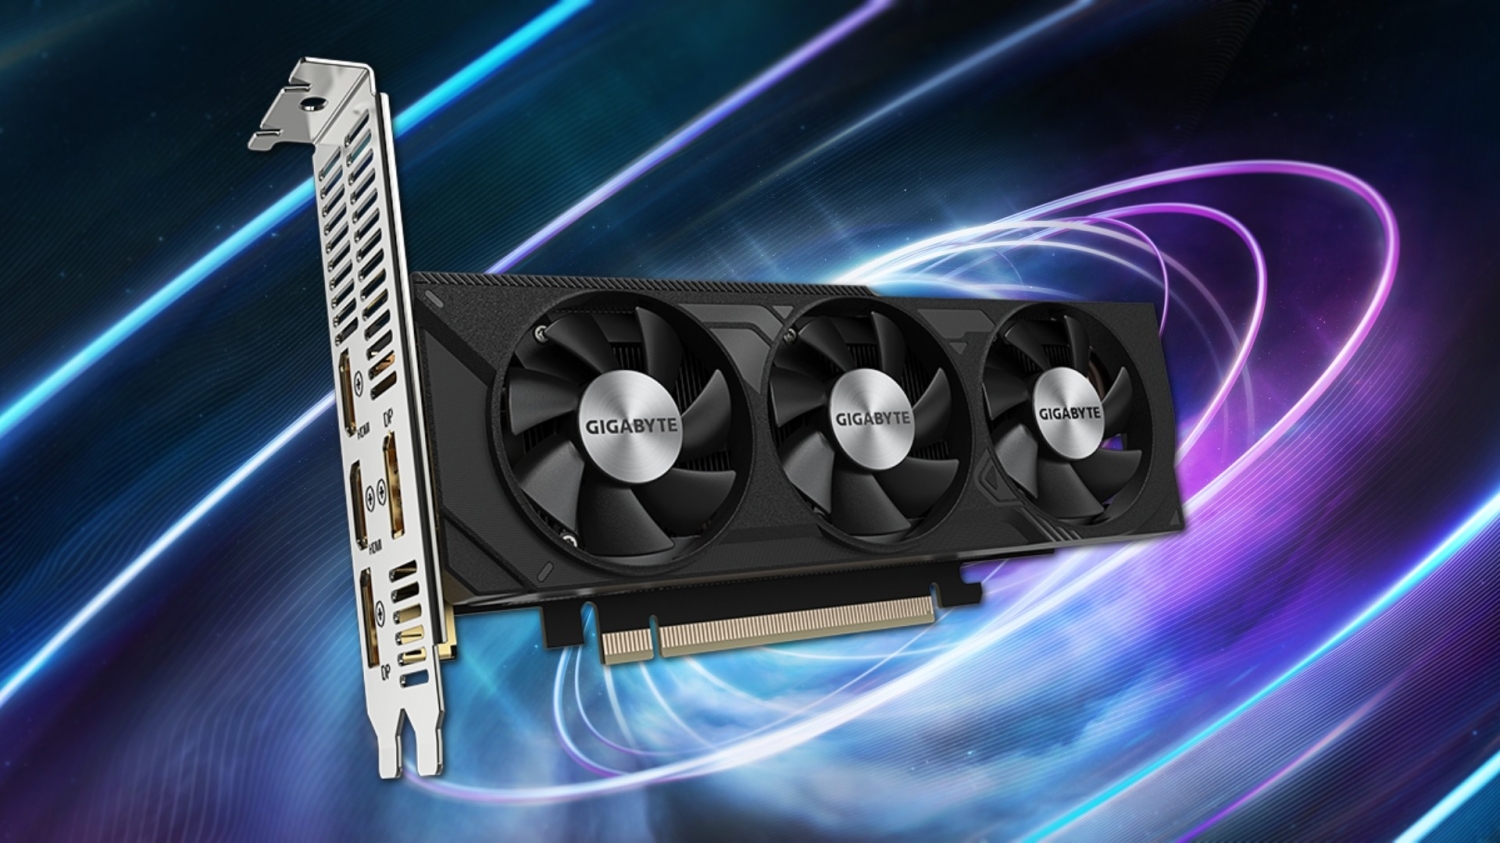 ASUS introduces low-profile GeForce RTX 4060 graphics card with three fans  